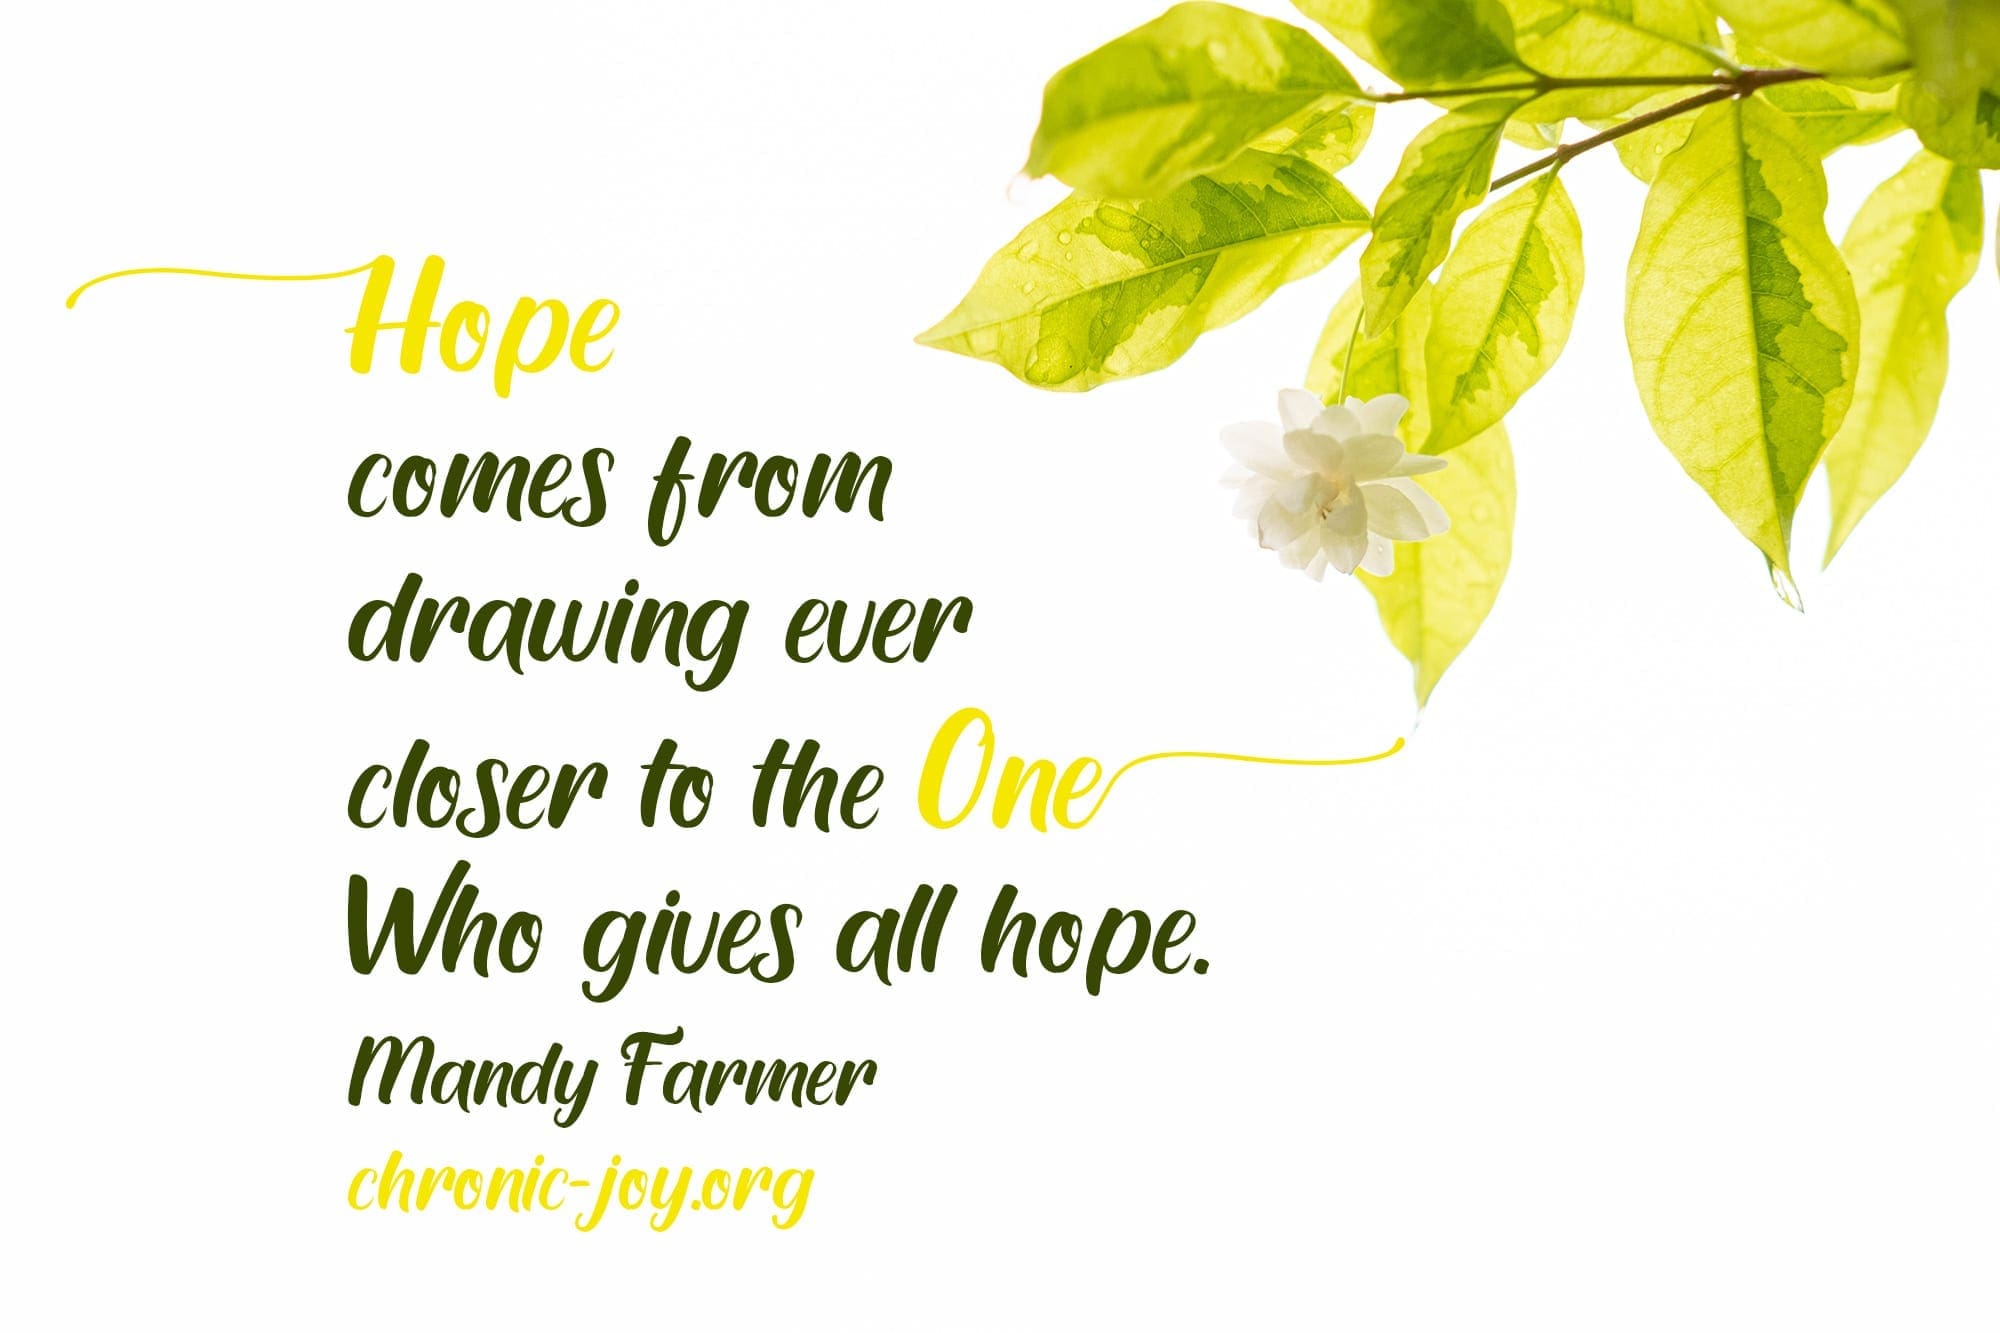 "Hope comes from drawing ever closer to the One Who gives all hope." Mandy Farmer